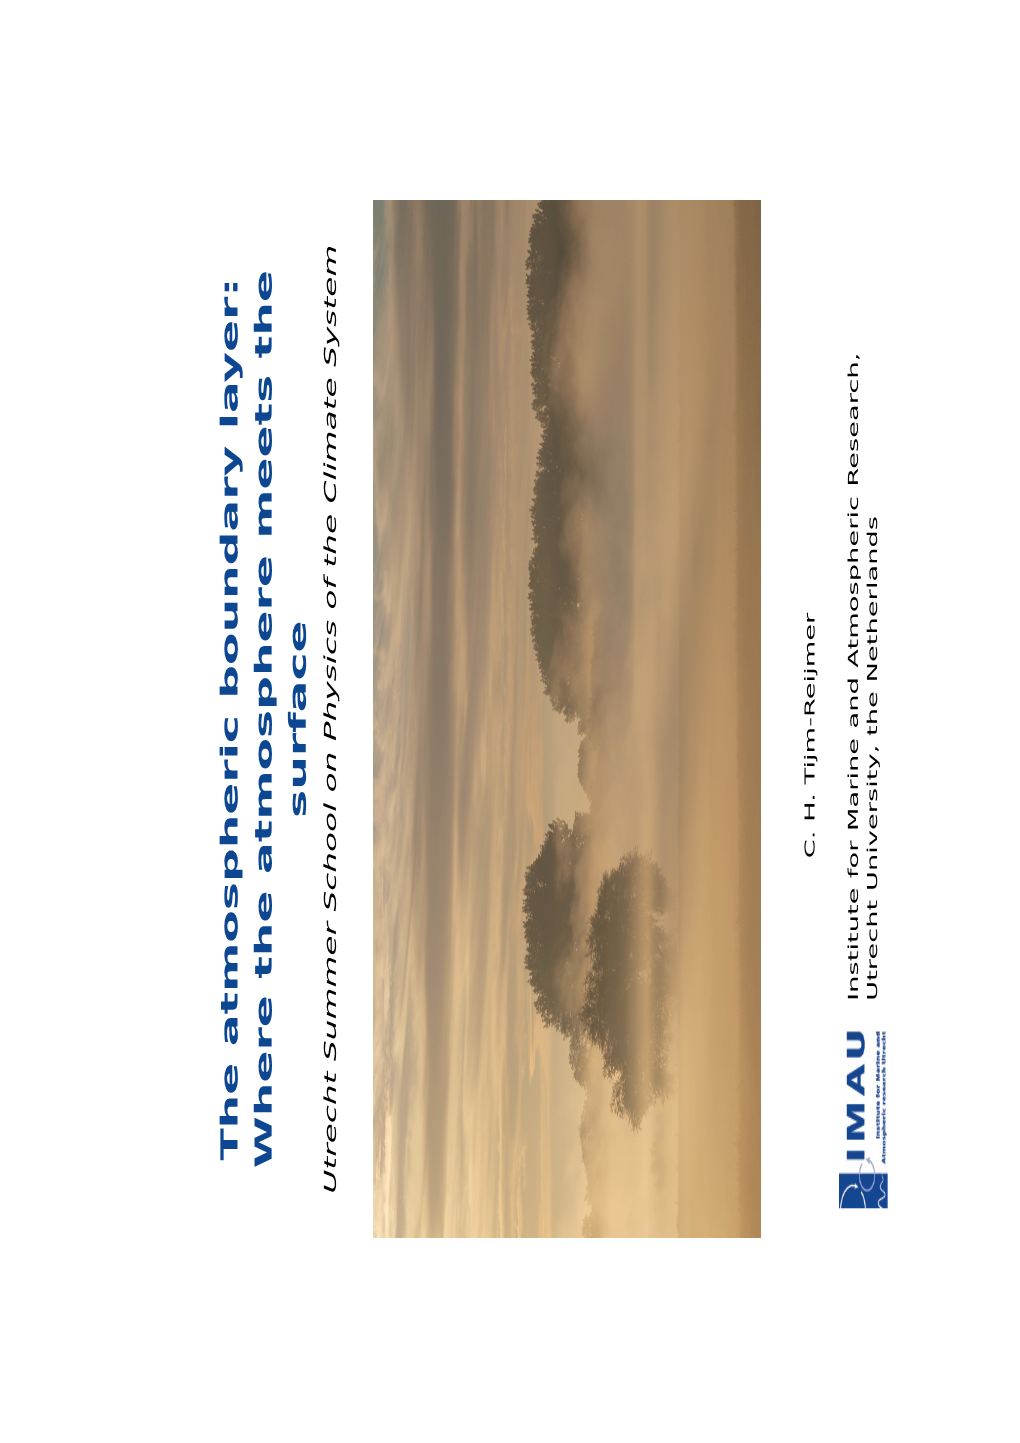 The Atmospheric Boundary Layer: Where the Atmosphere Meets the Surface Utrecht Summer School on Physics of the Climate System